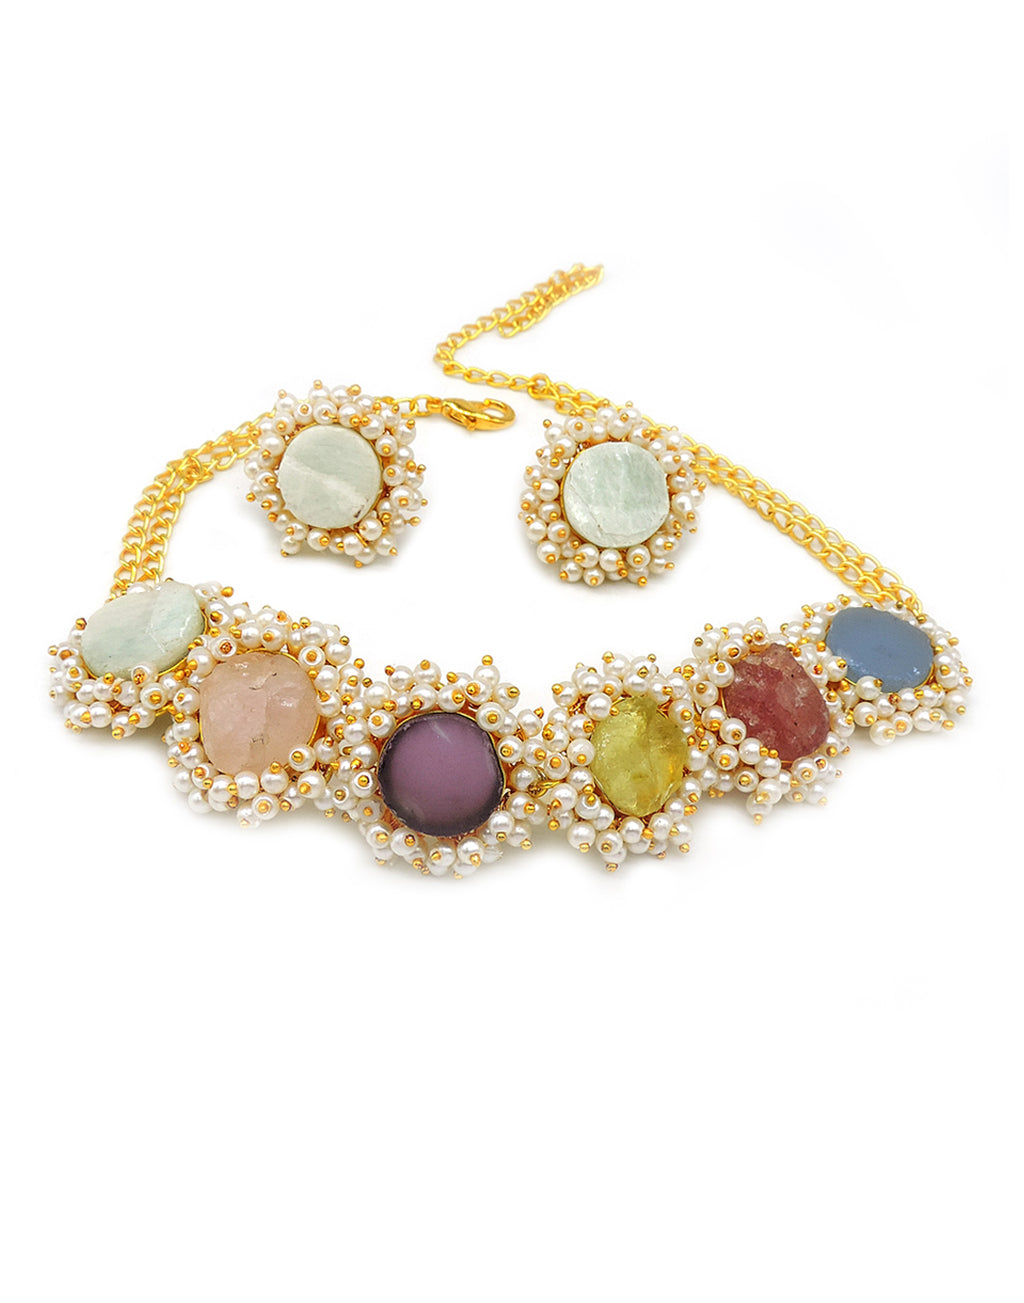 Rainbow Bloom Necklace - Statement Necklaces - Gold-Plated & Hypoallergenic Jewellery - Made in India - Dubai Jewellery - Dori